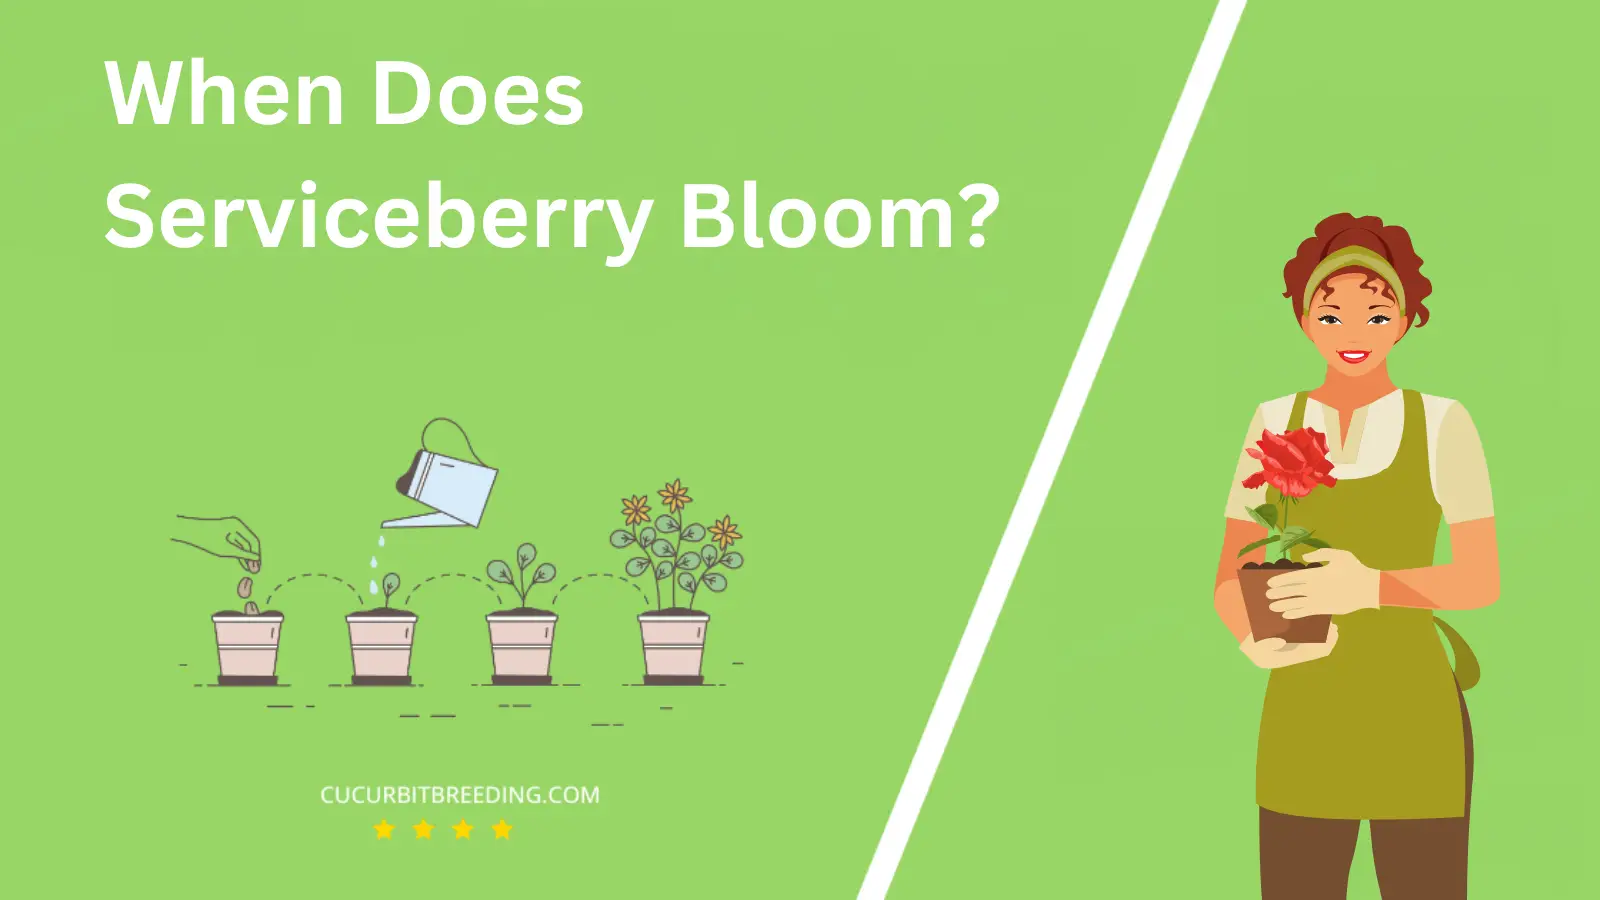 When Does Serviceberry Bloom?